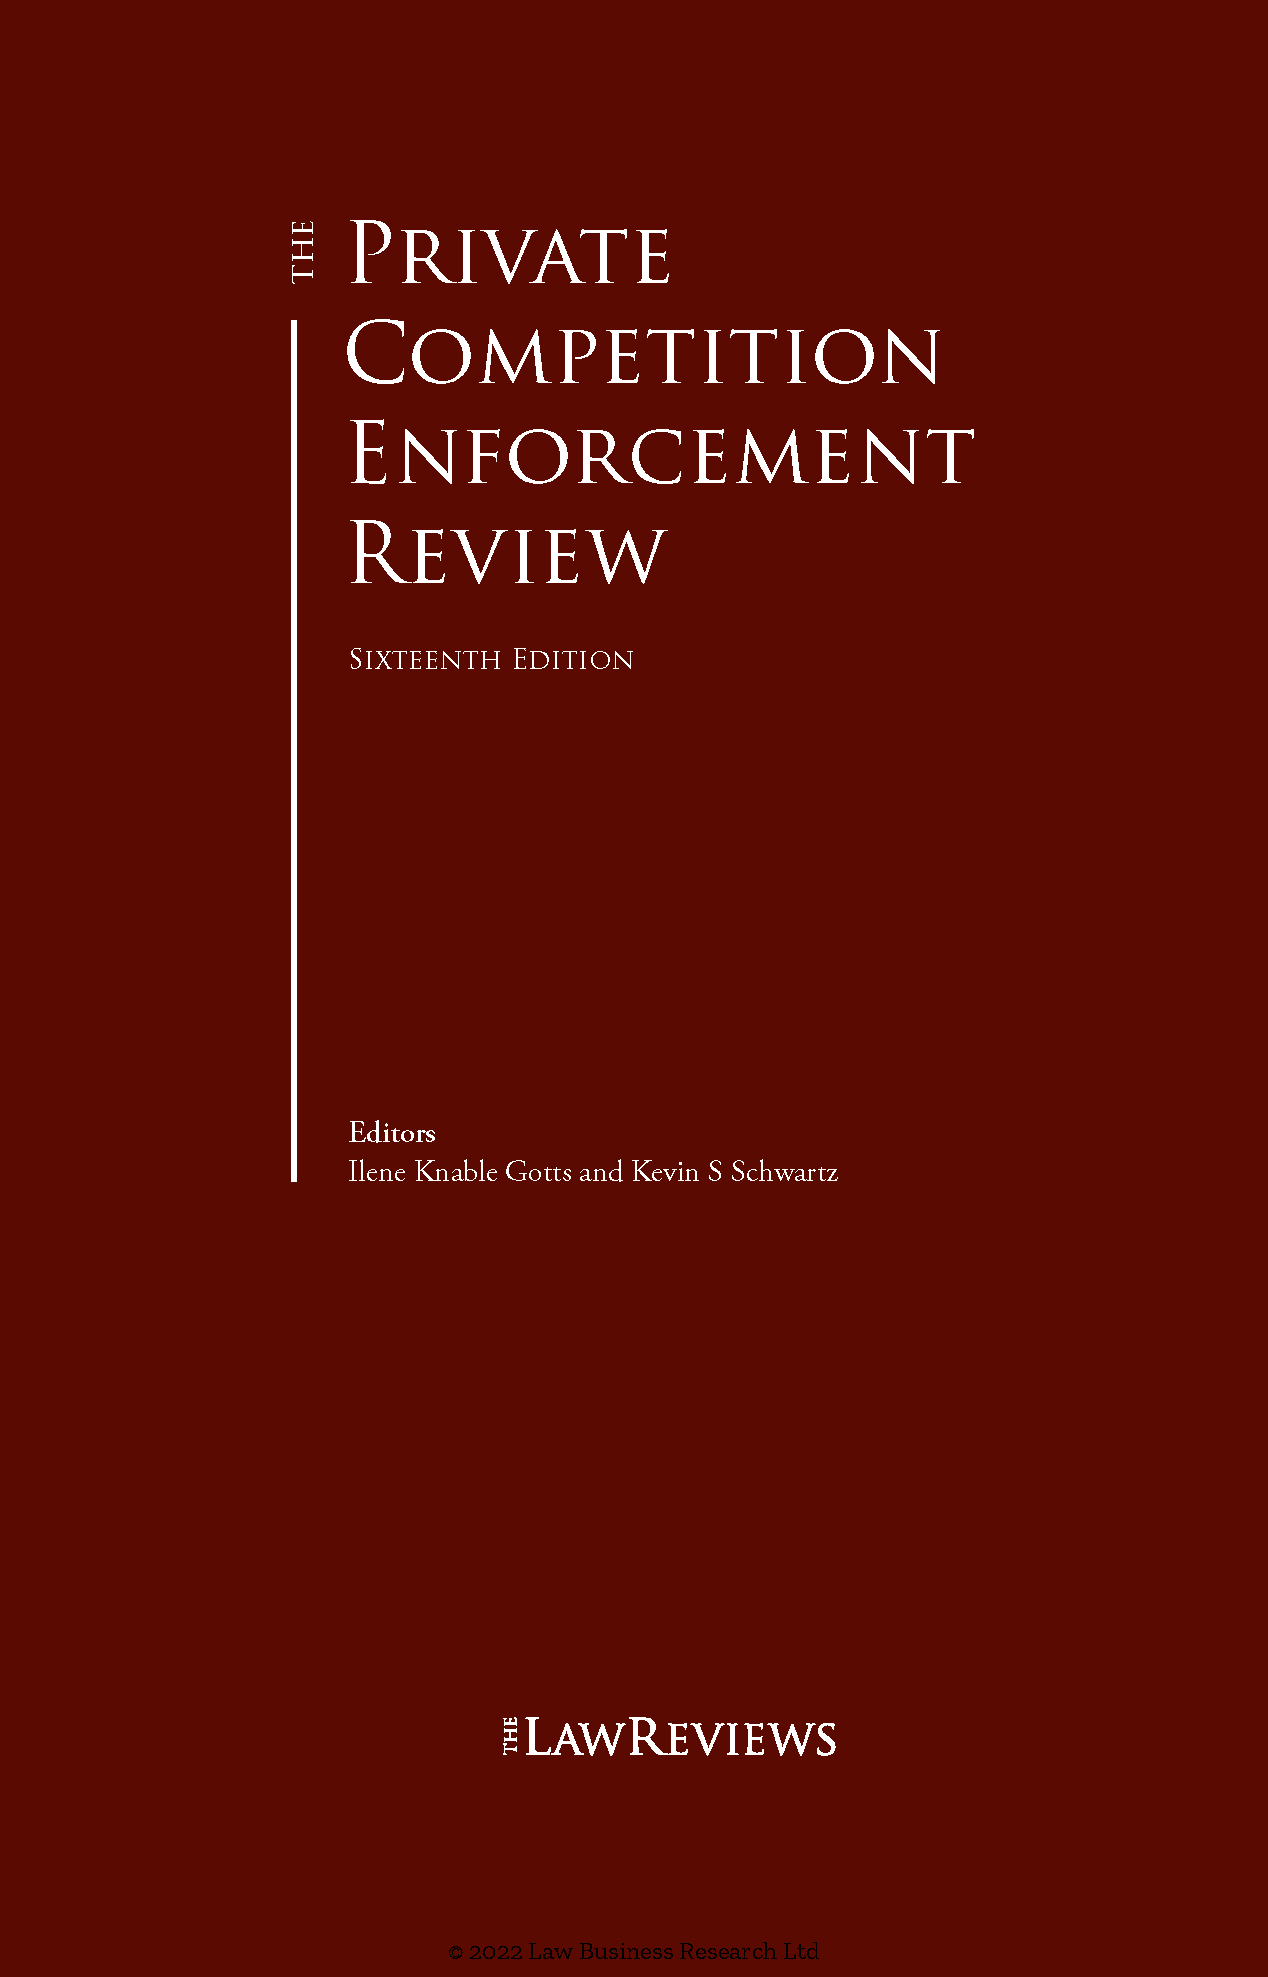 The Private Competition Enforcement Review